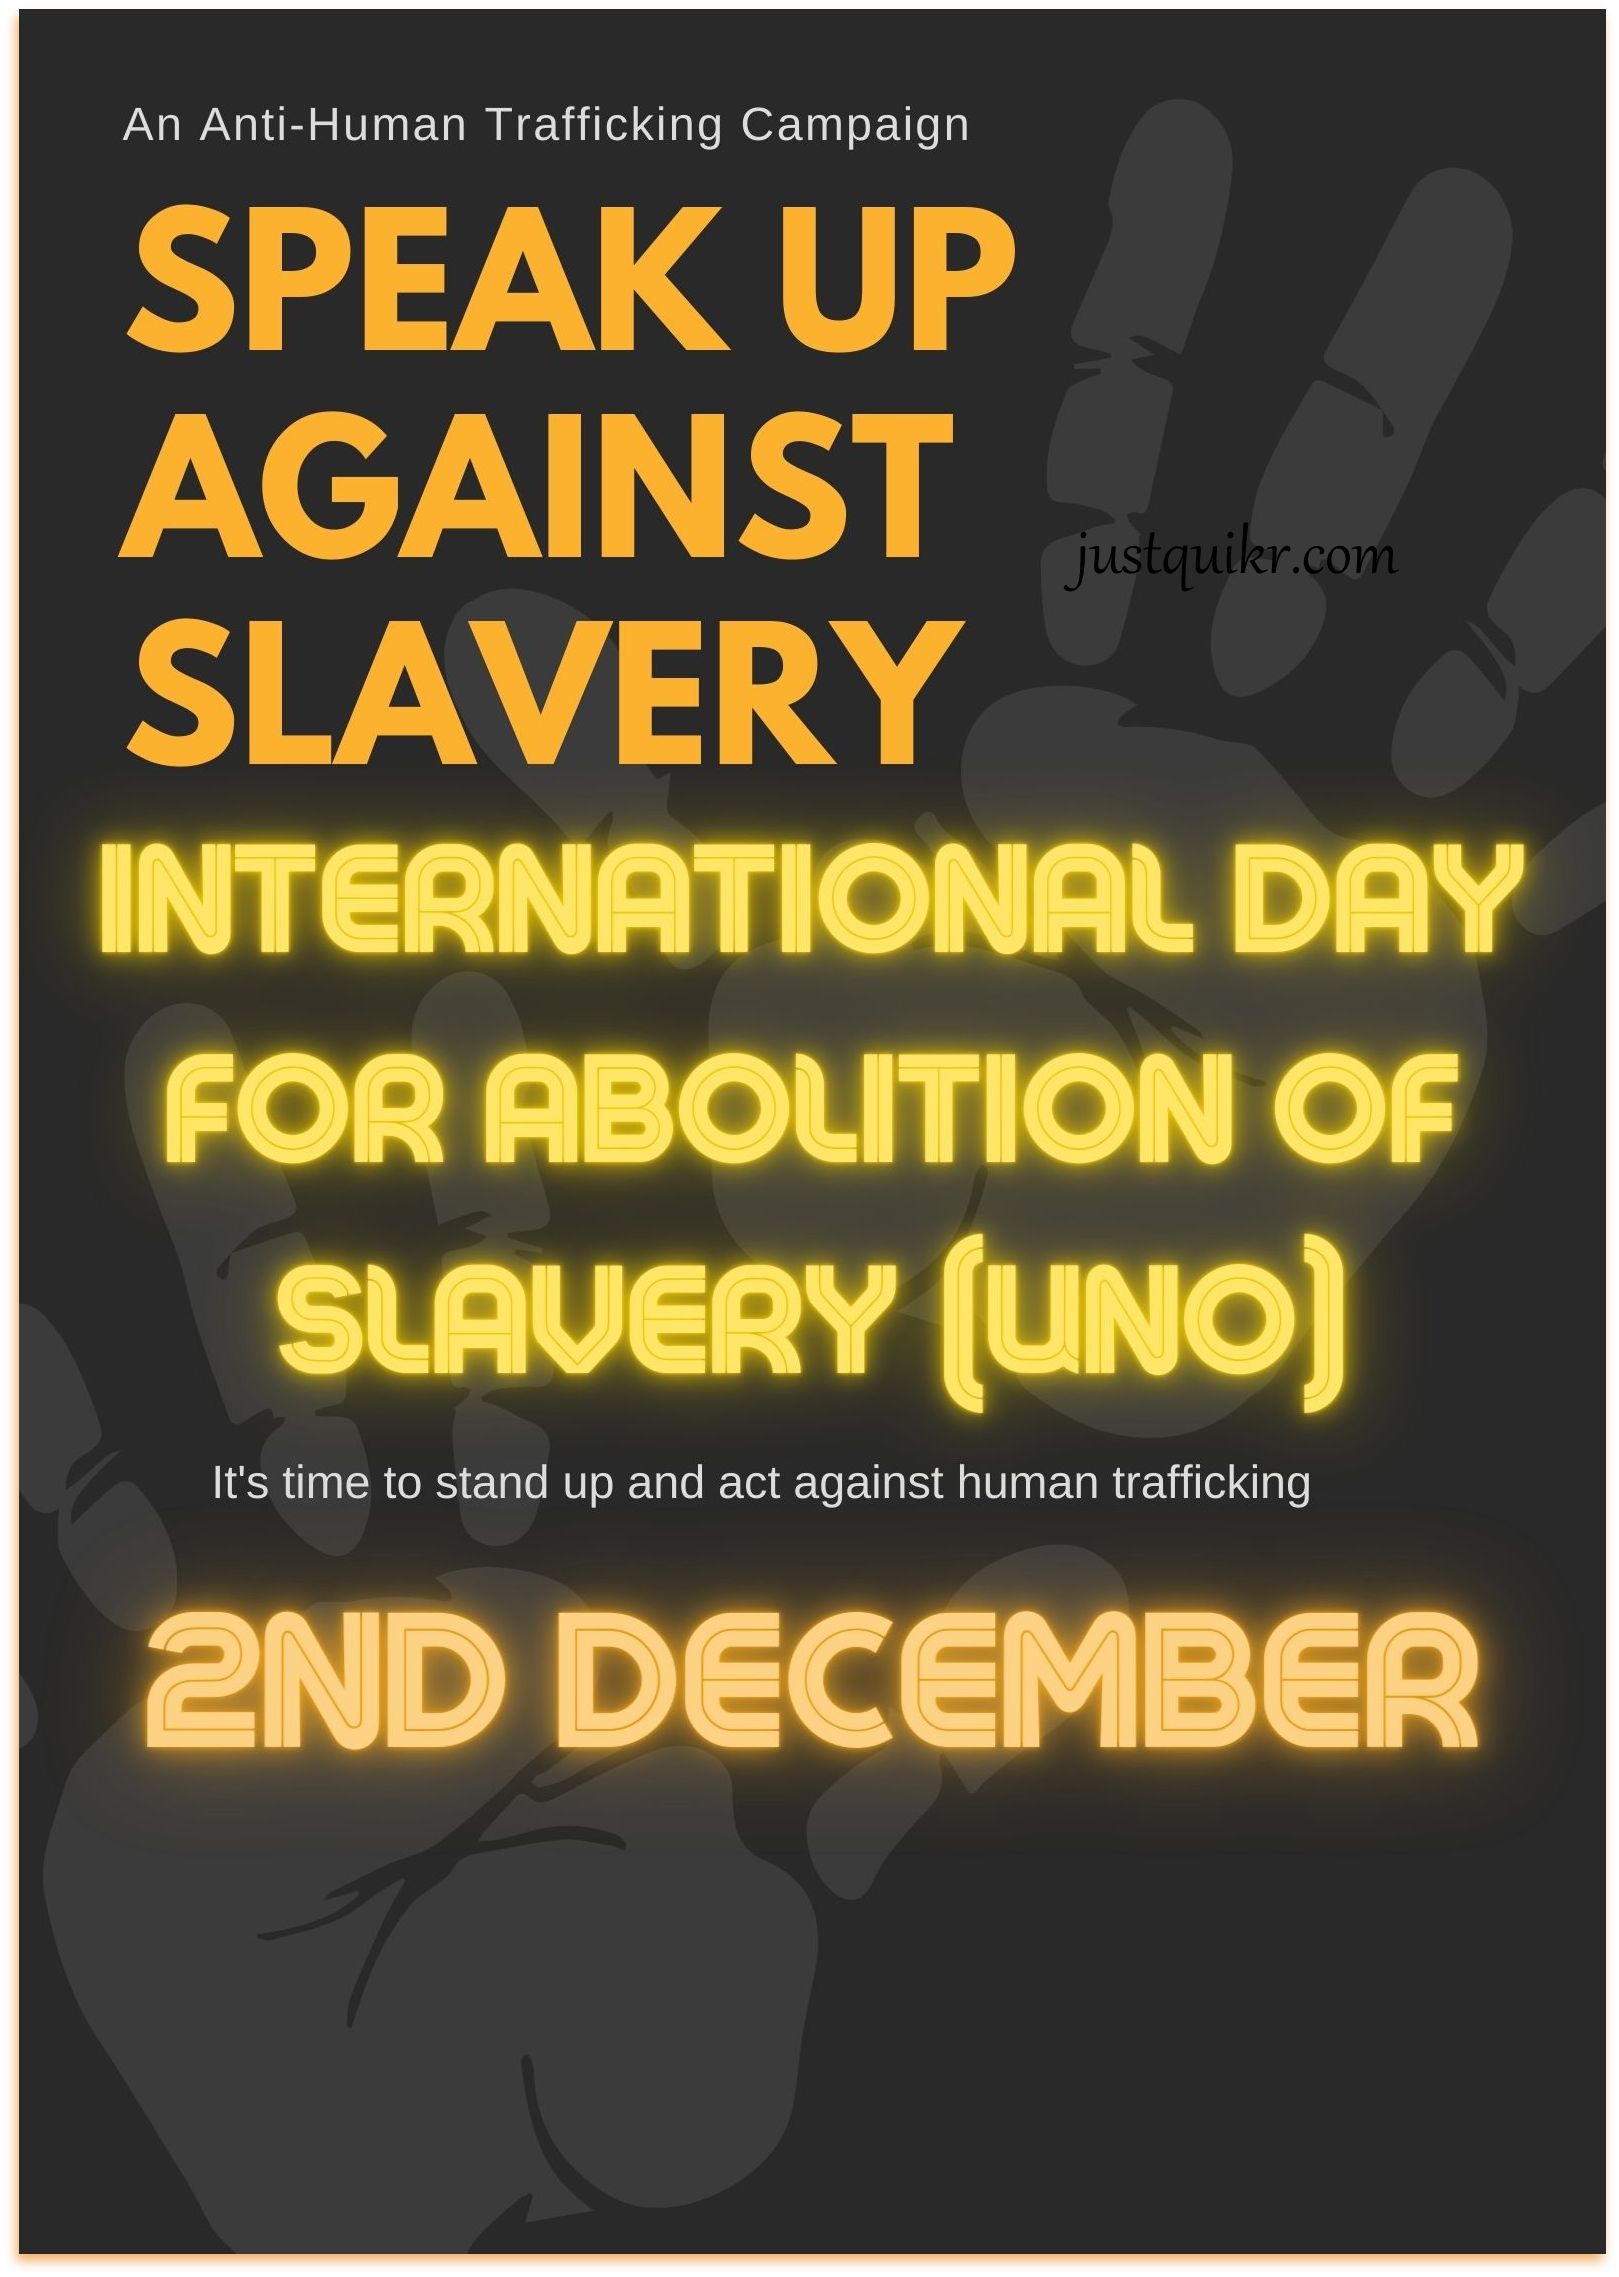 International Day For Abolition of Slavery (UNO)